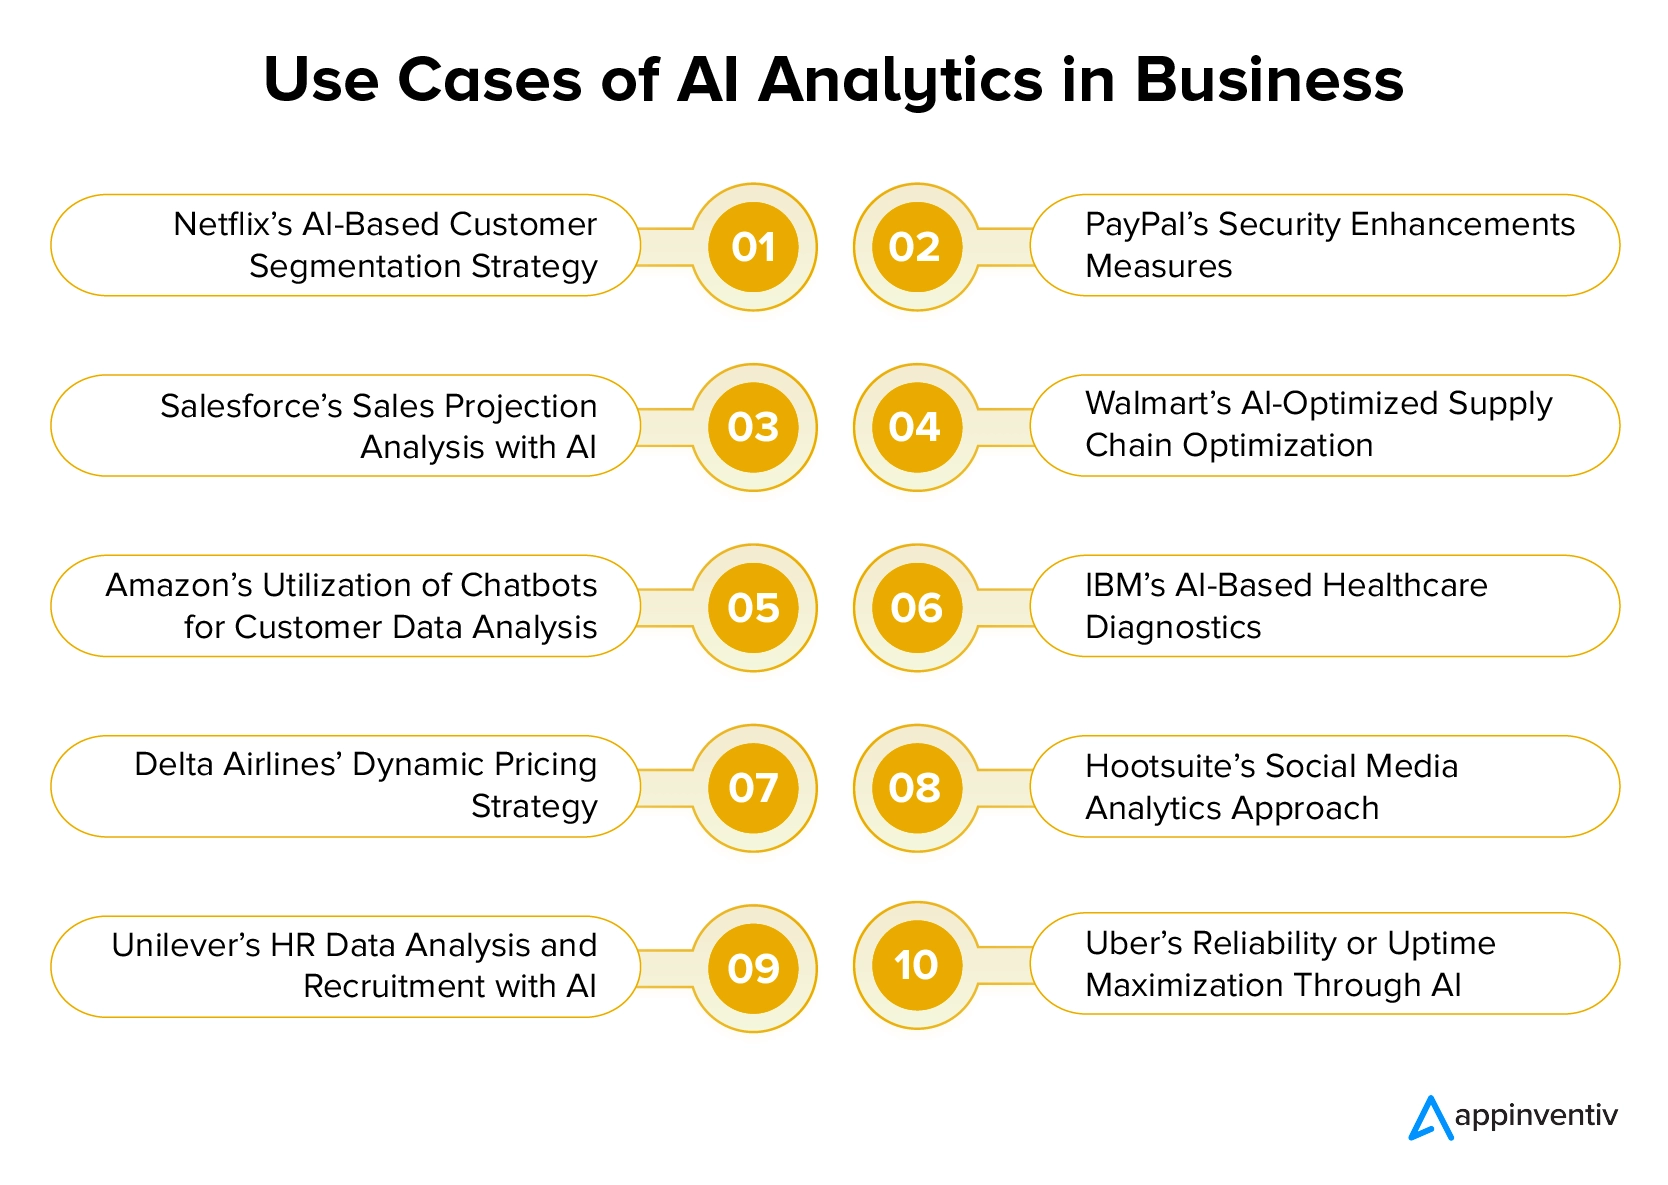 Use cases of AI analytics in business